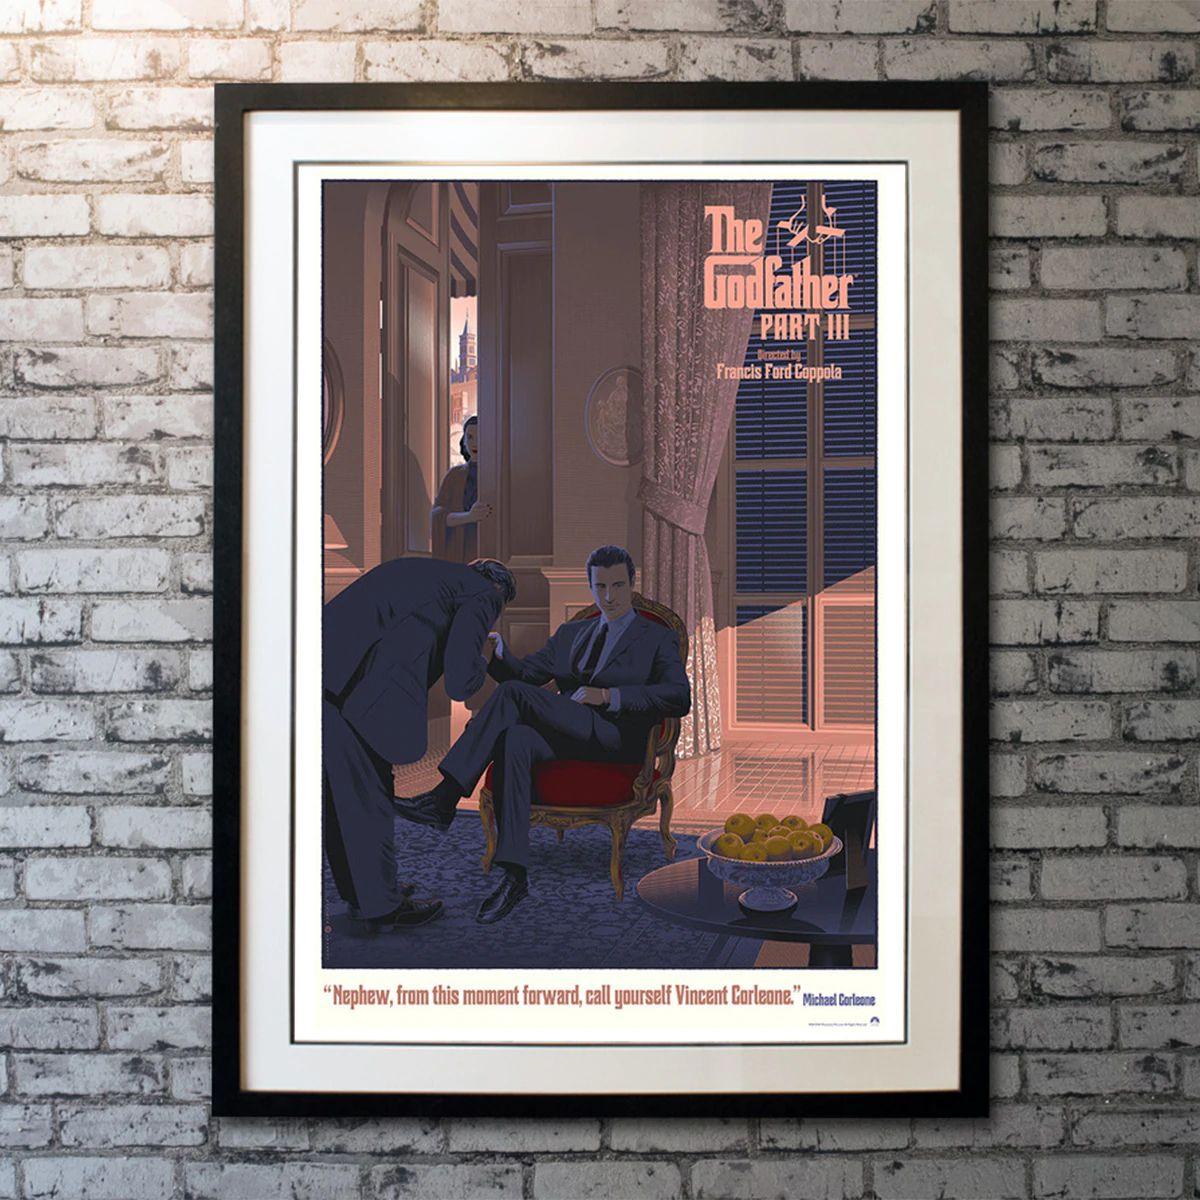 The Godfather: Part III, Unframed Poster, 2017

Limited Edition Print (24 x 36). 2017 Limited Edition screen print of 180 by artist Laurent Durieux for 